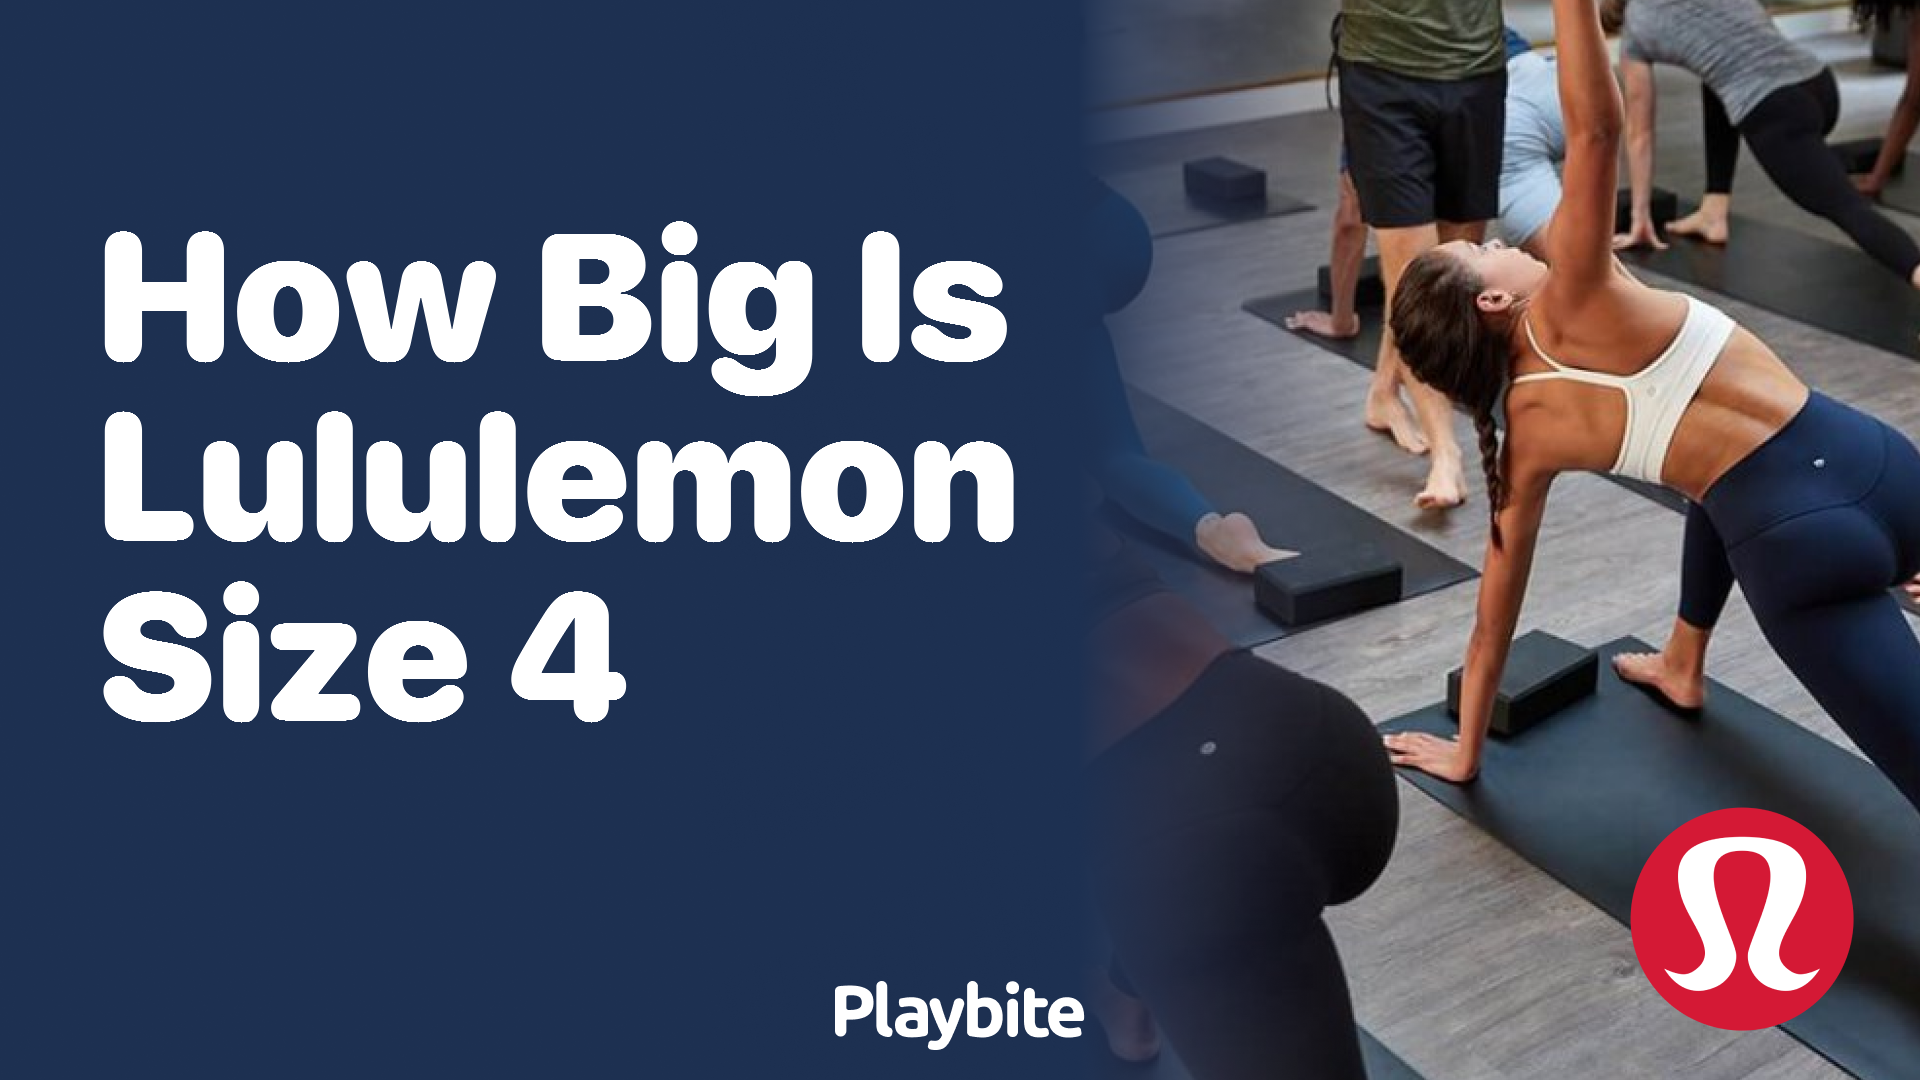 How Big Is Lululemon Size 4? Unraveling the Sizing Confusion